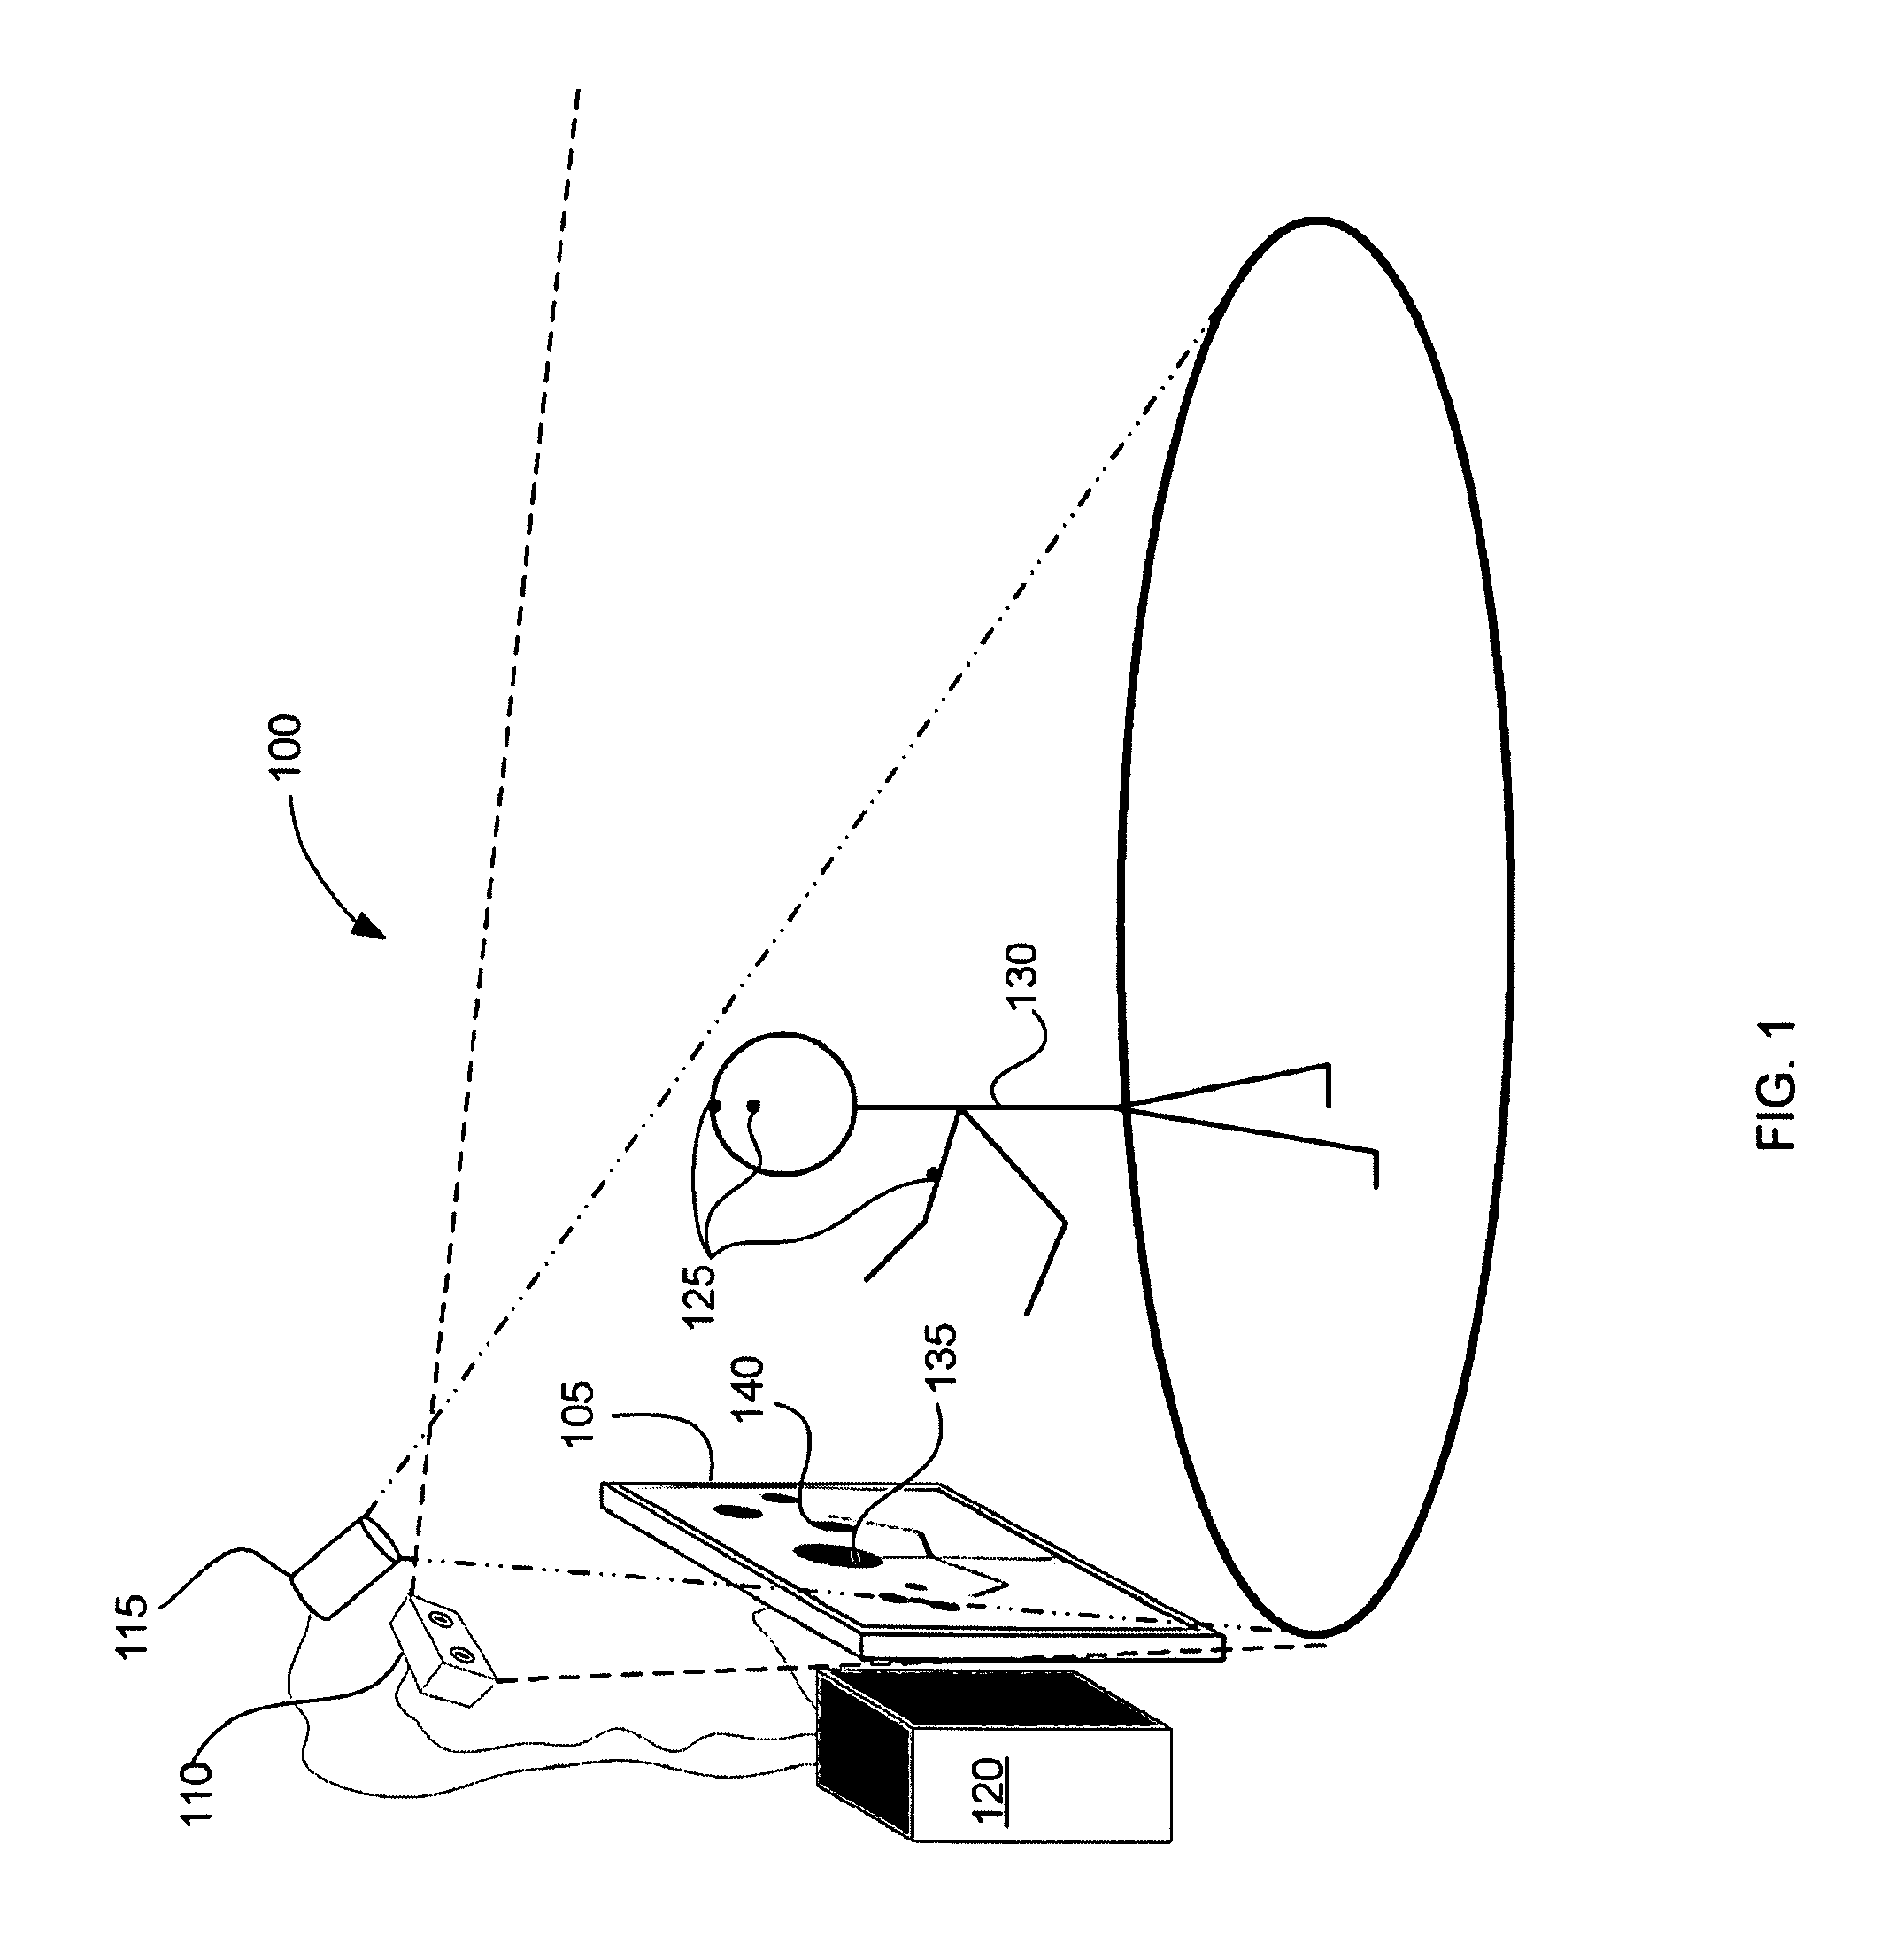 Display Using a Three-Dimensional vision System